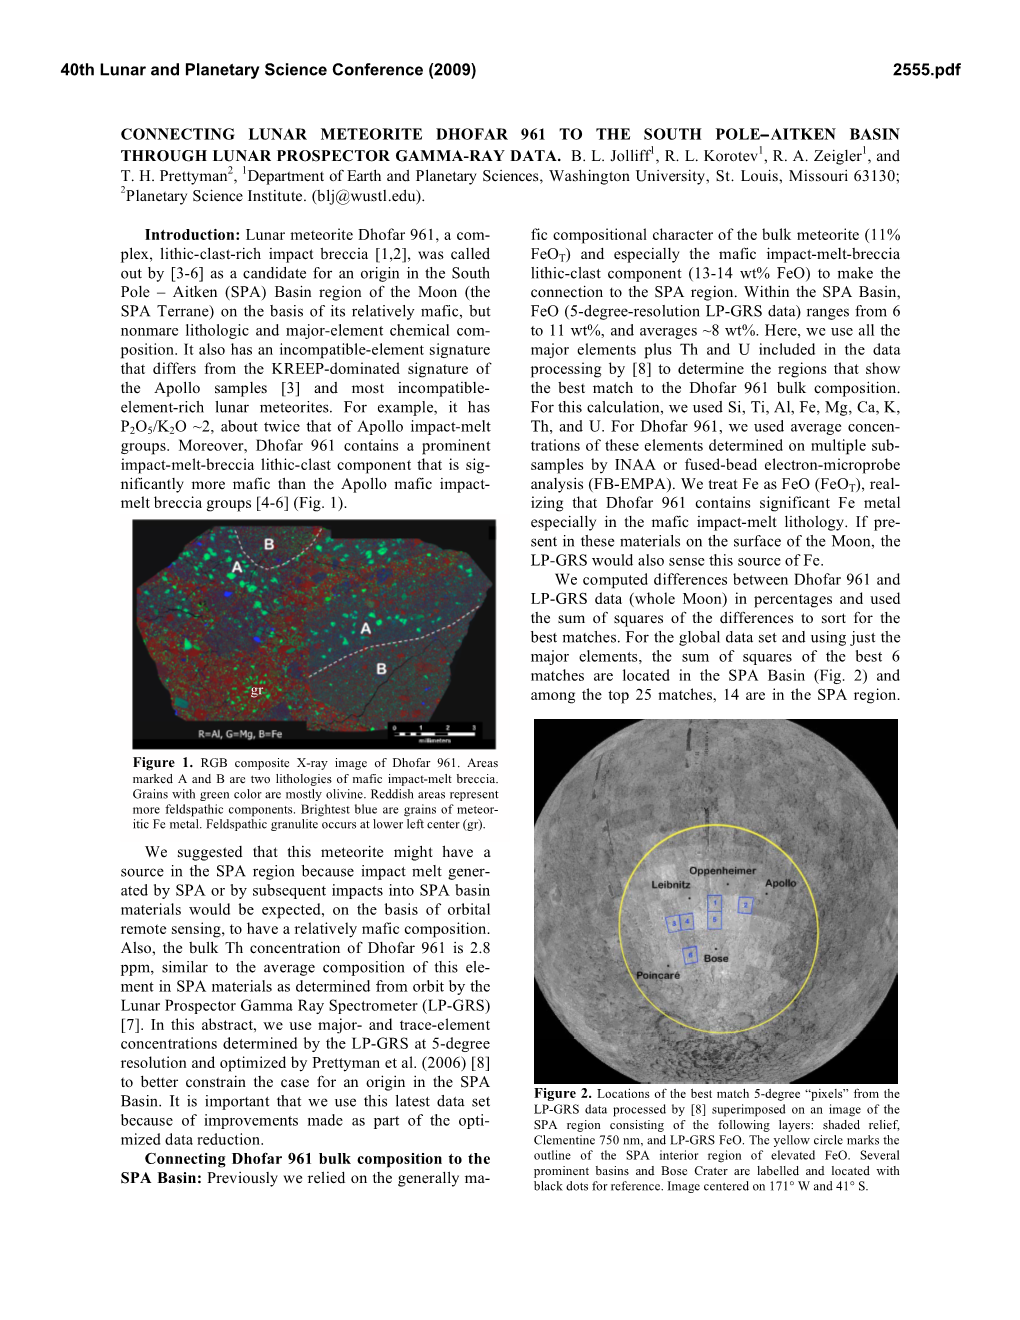 Connecting Lunar Meteorite Dhofar 961 to the South PoleAitken Basin Through Lunar Prospector Gamma-Ray Data